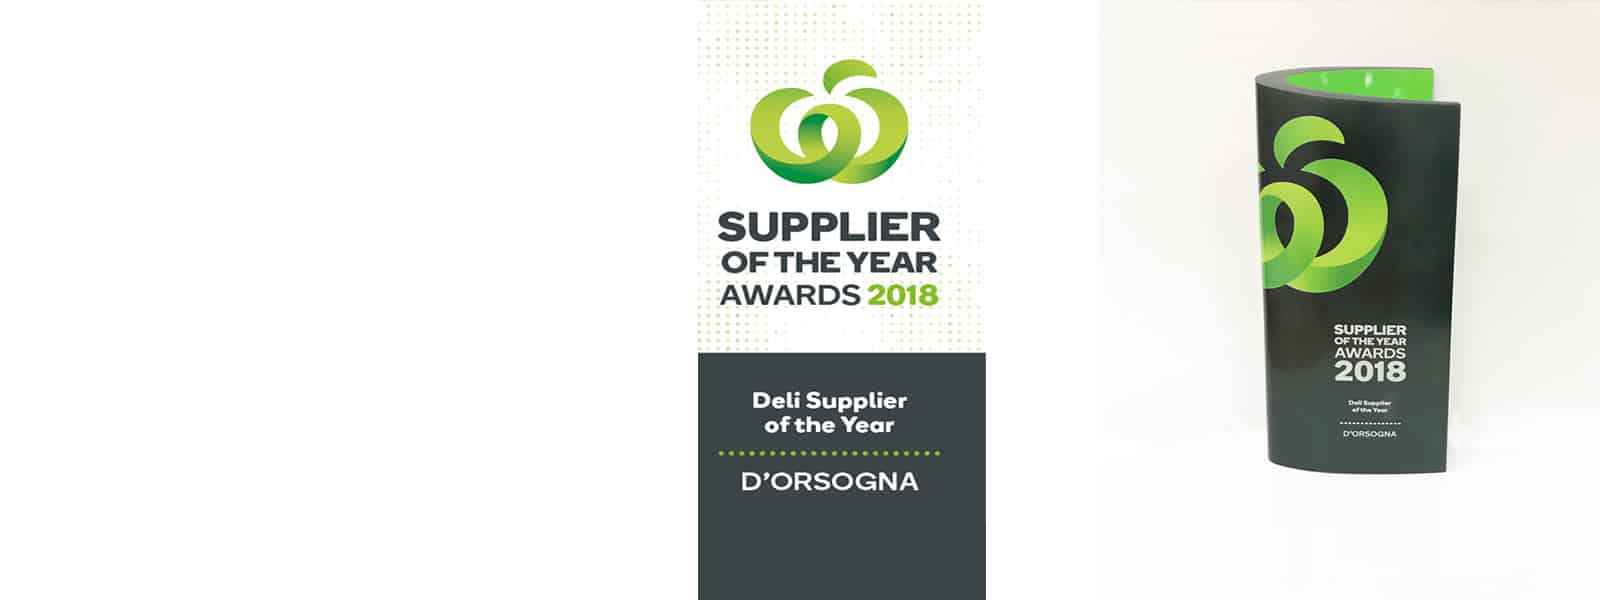 D'Orsogna wins Woolworths Deli Supplier of the Year 2018 award